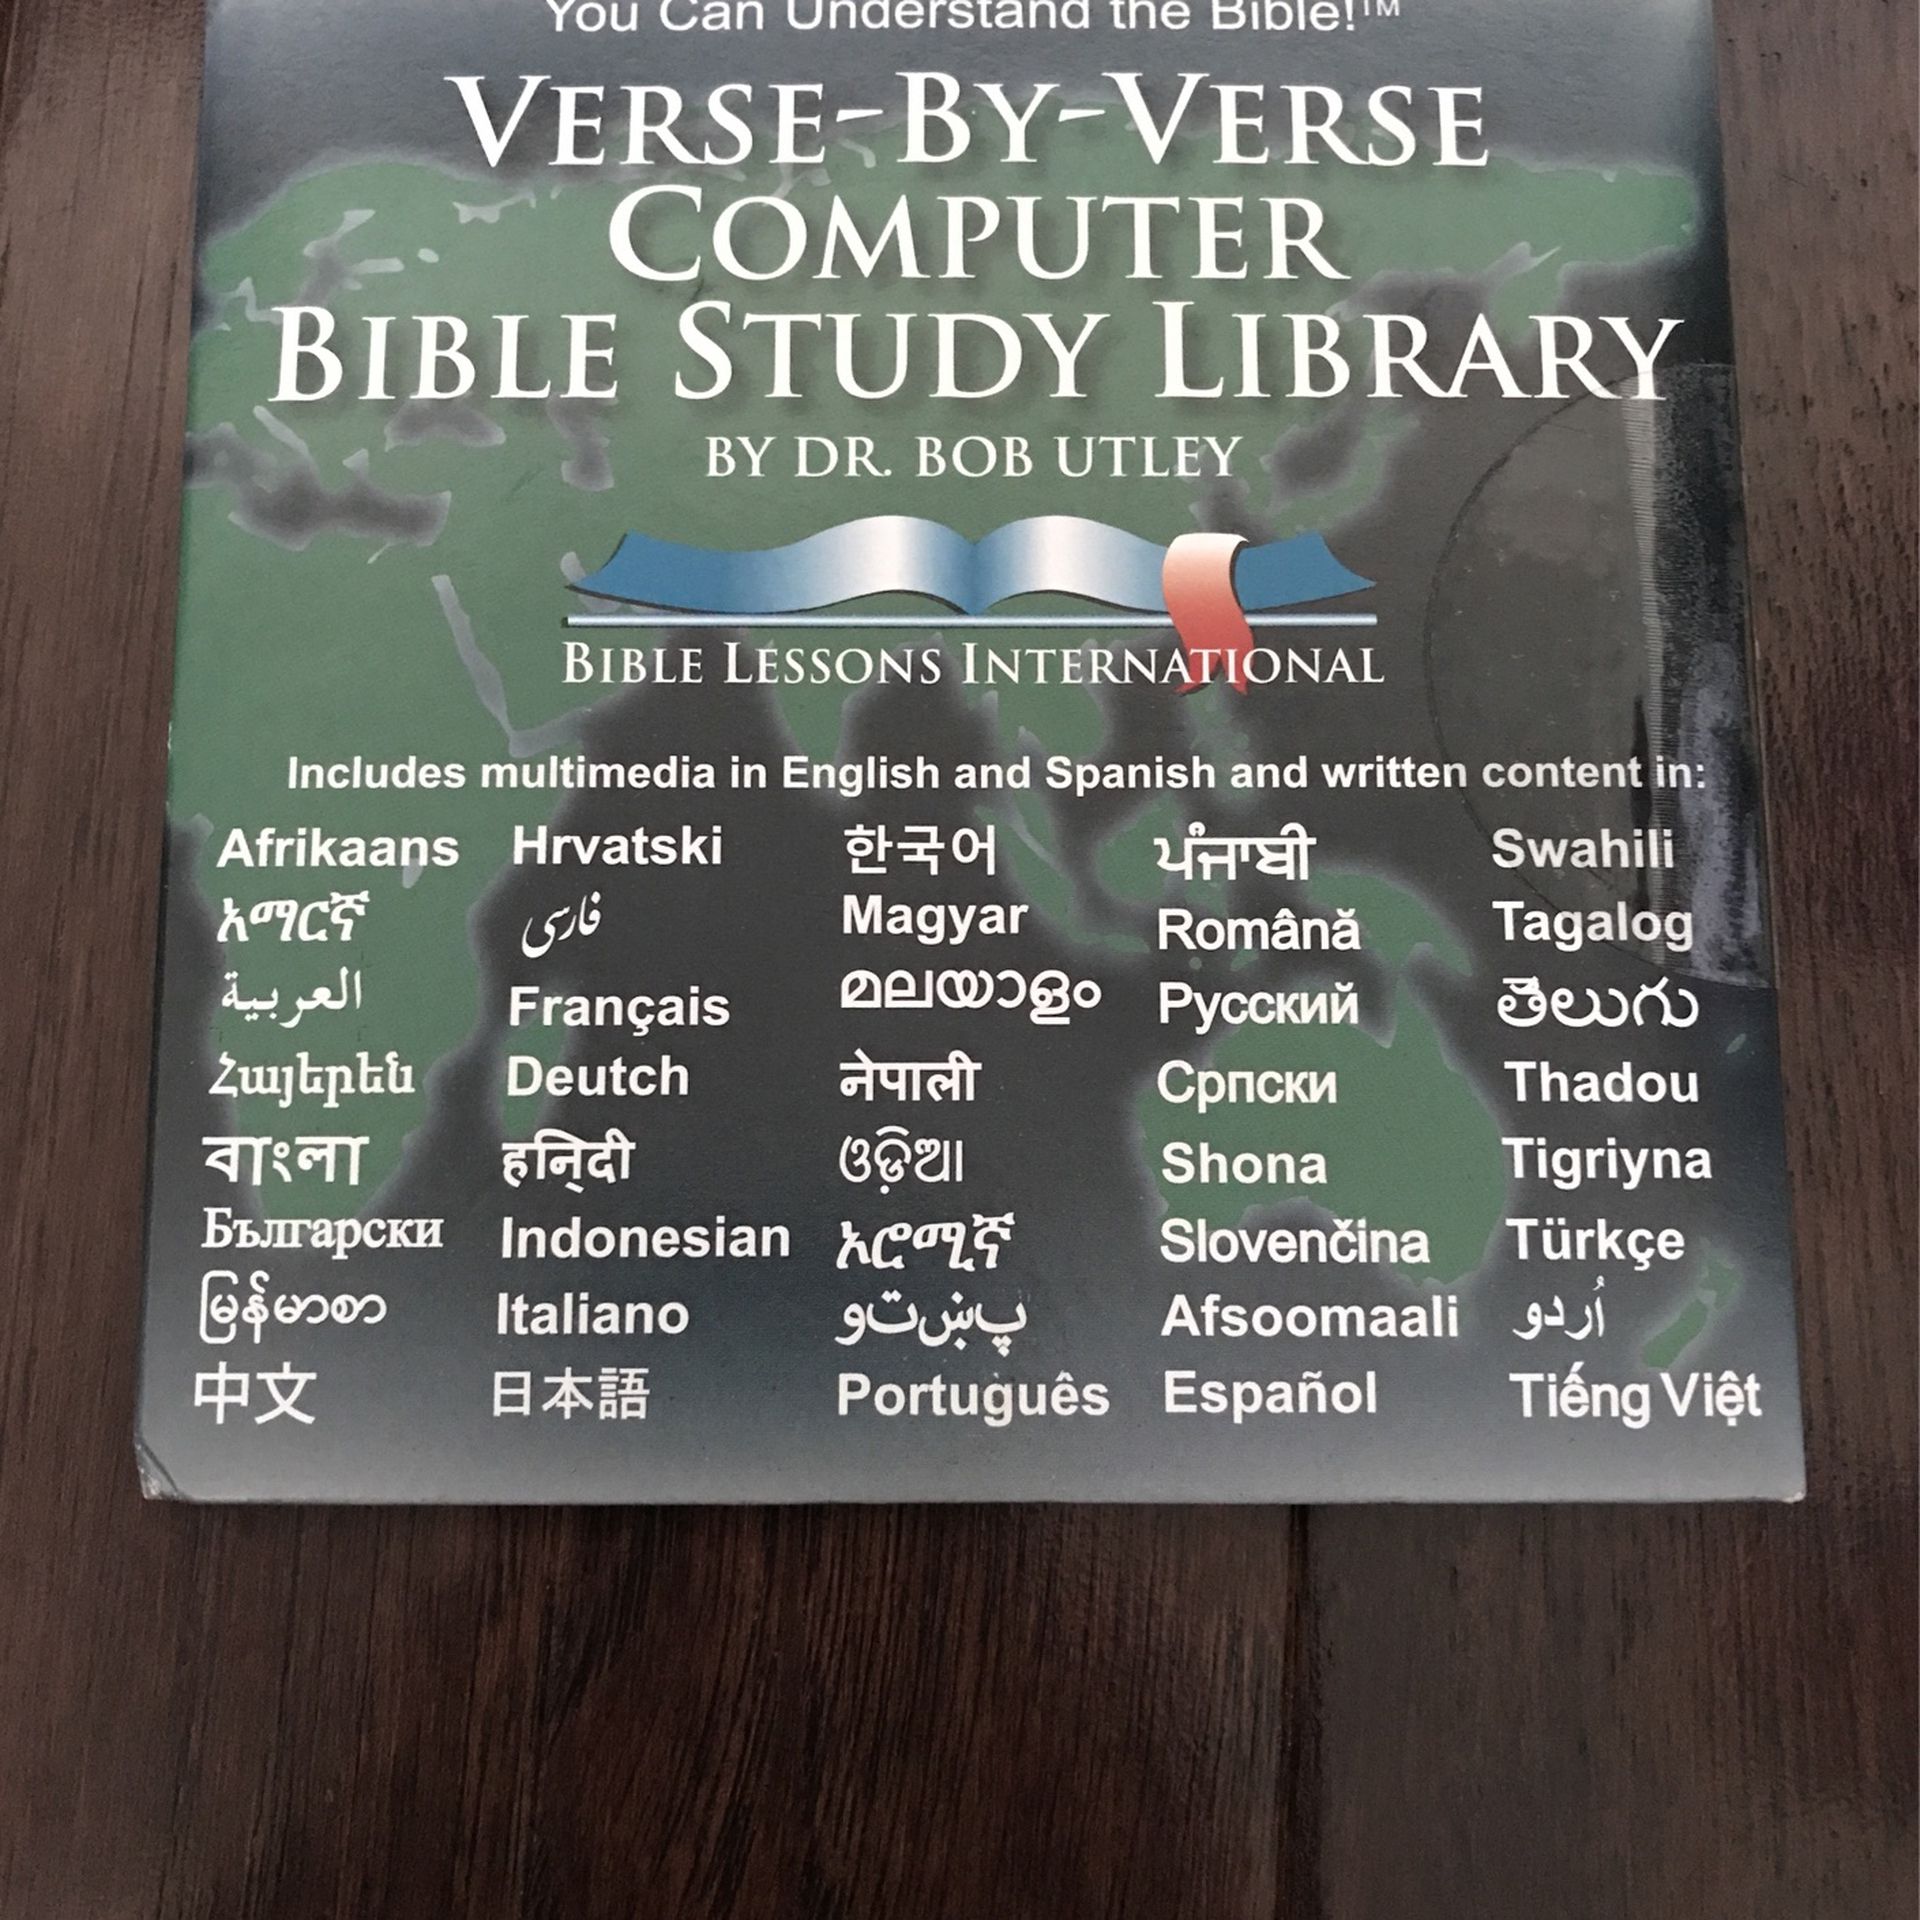 Verse-by-verse Computer Bible Study Library